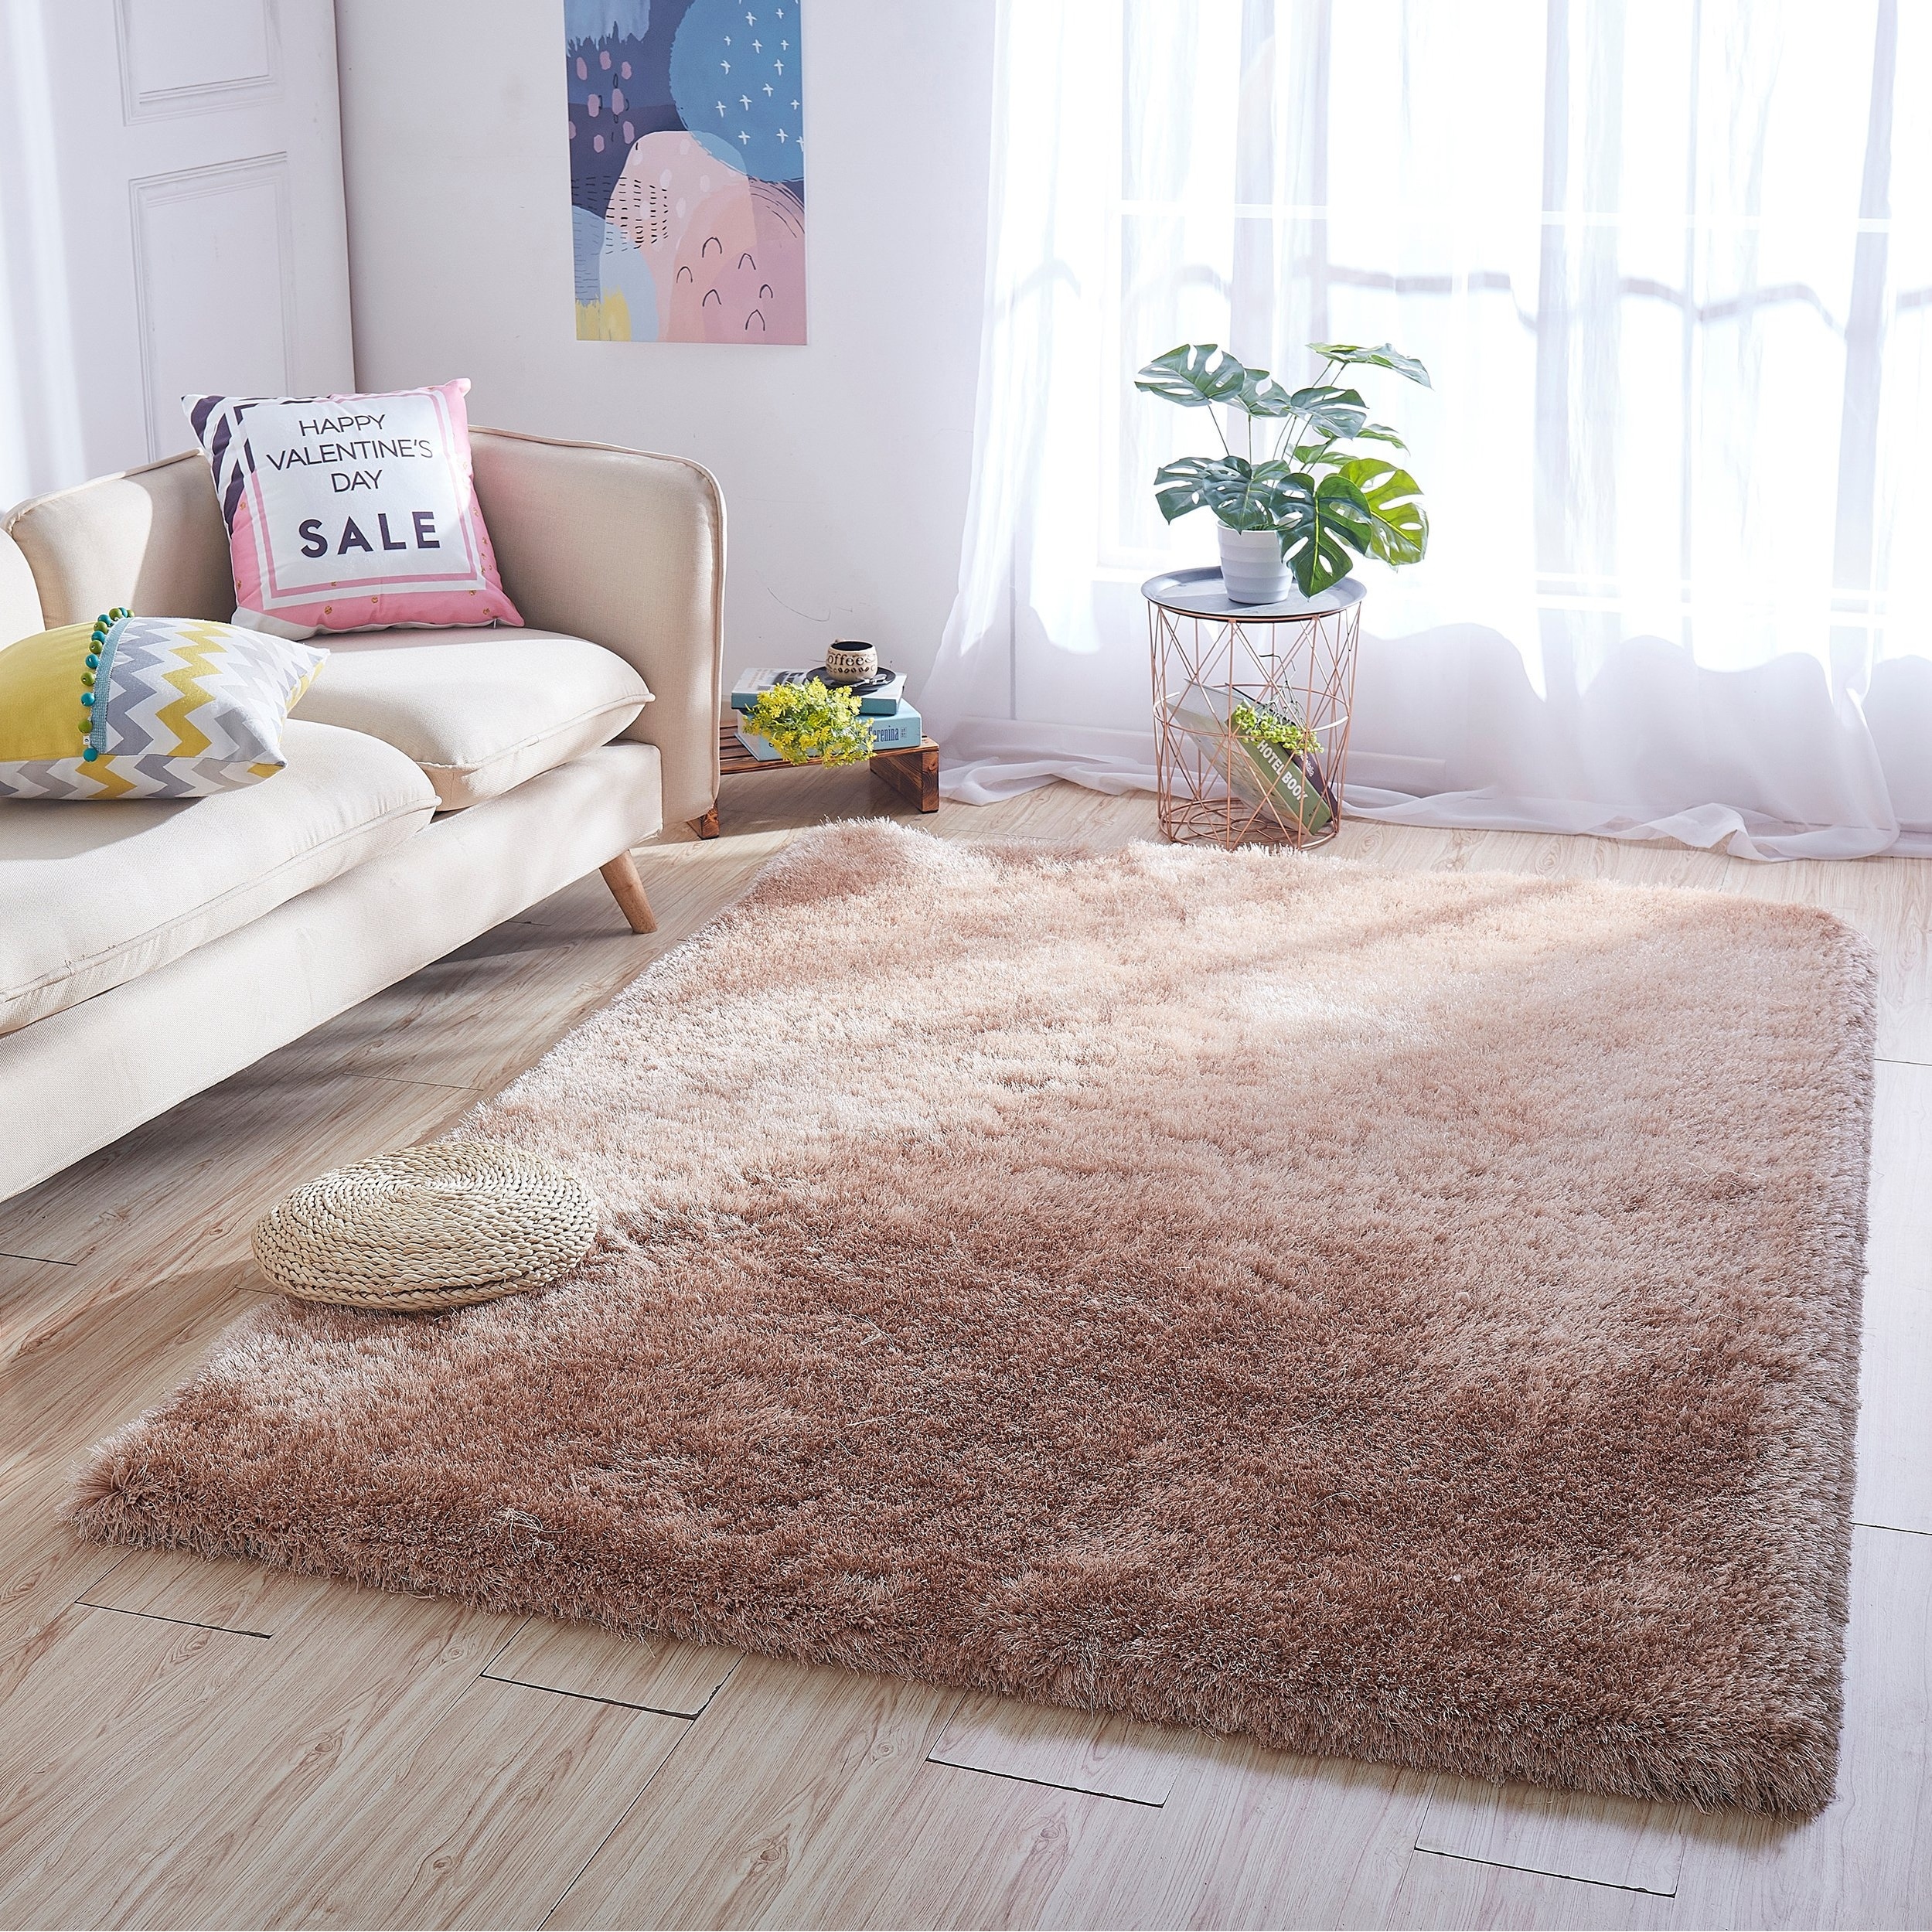 Superior Indoor Large Shag Area Rug with Cotton Backing, Ultra Plush and  Soft, Fuzzy Rugs for Living Room, Bedroom, Office, Playroom, Kids, Home  Floor